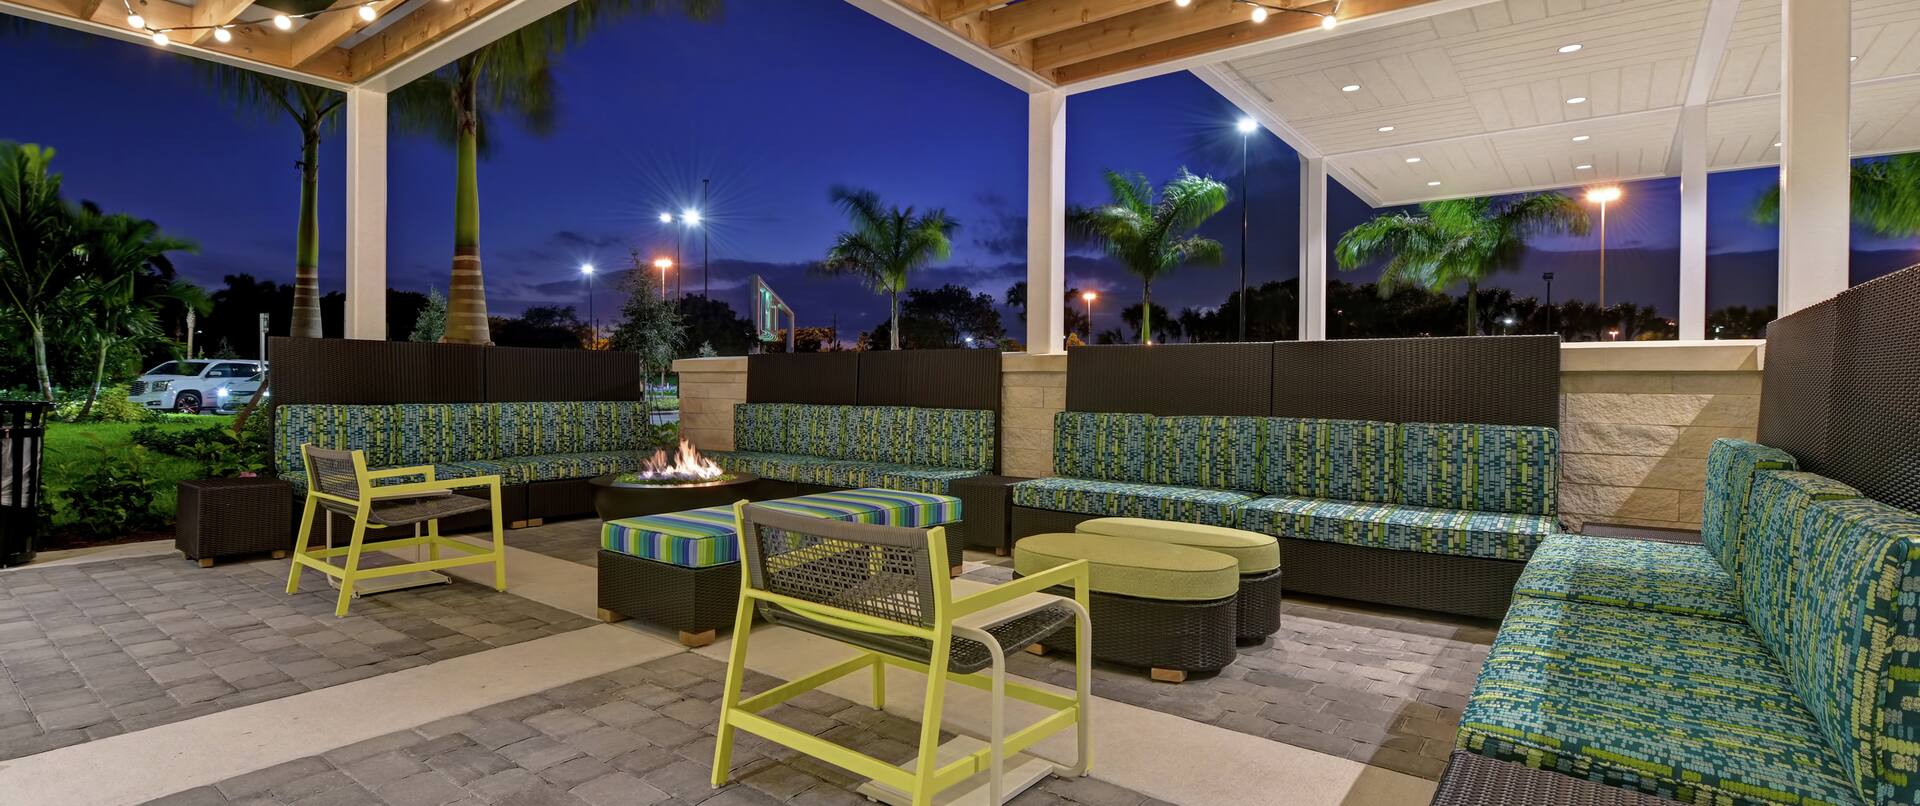 Patio Seating with Firepit